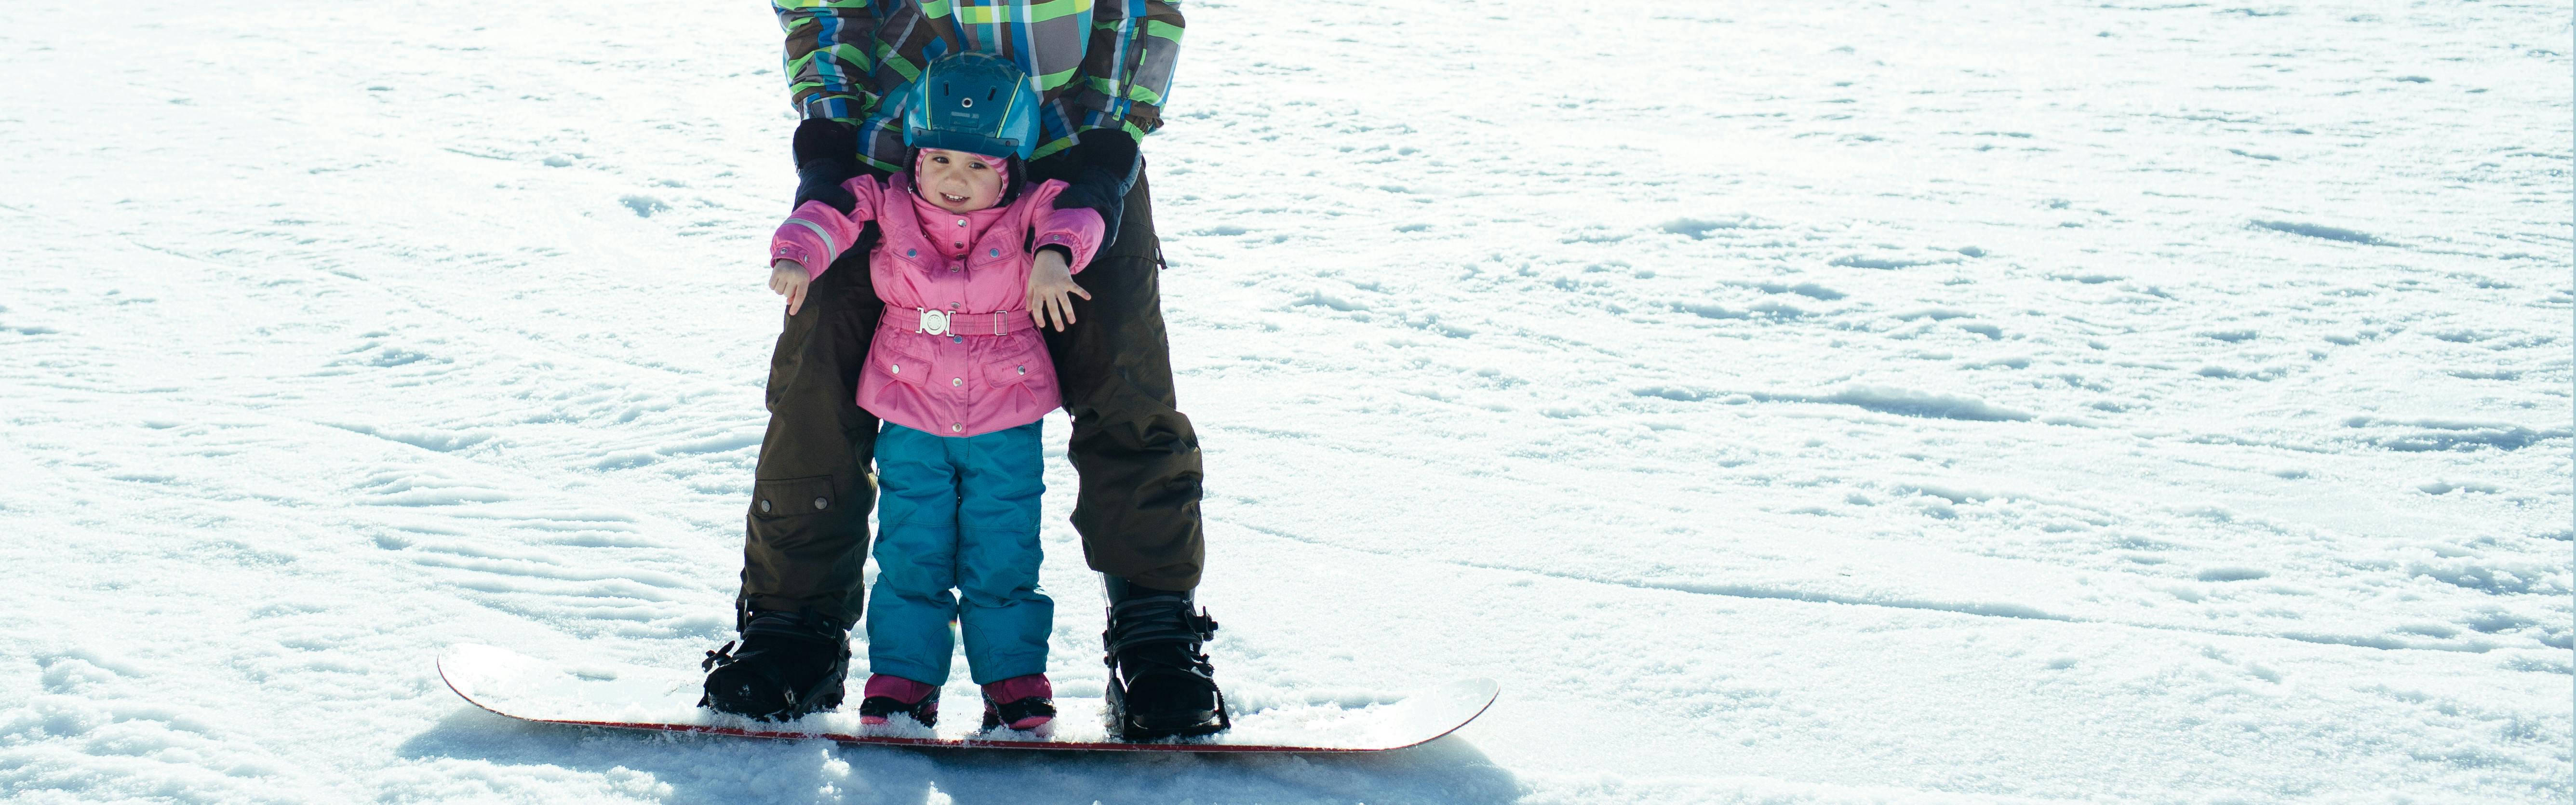 How to Prepare Your Kids for Their First Day Snowboarding